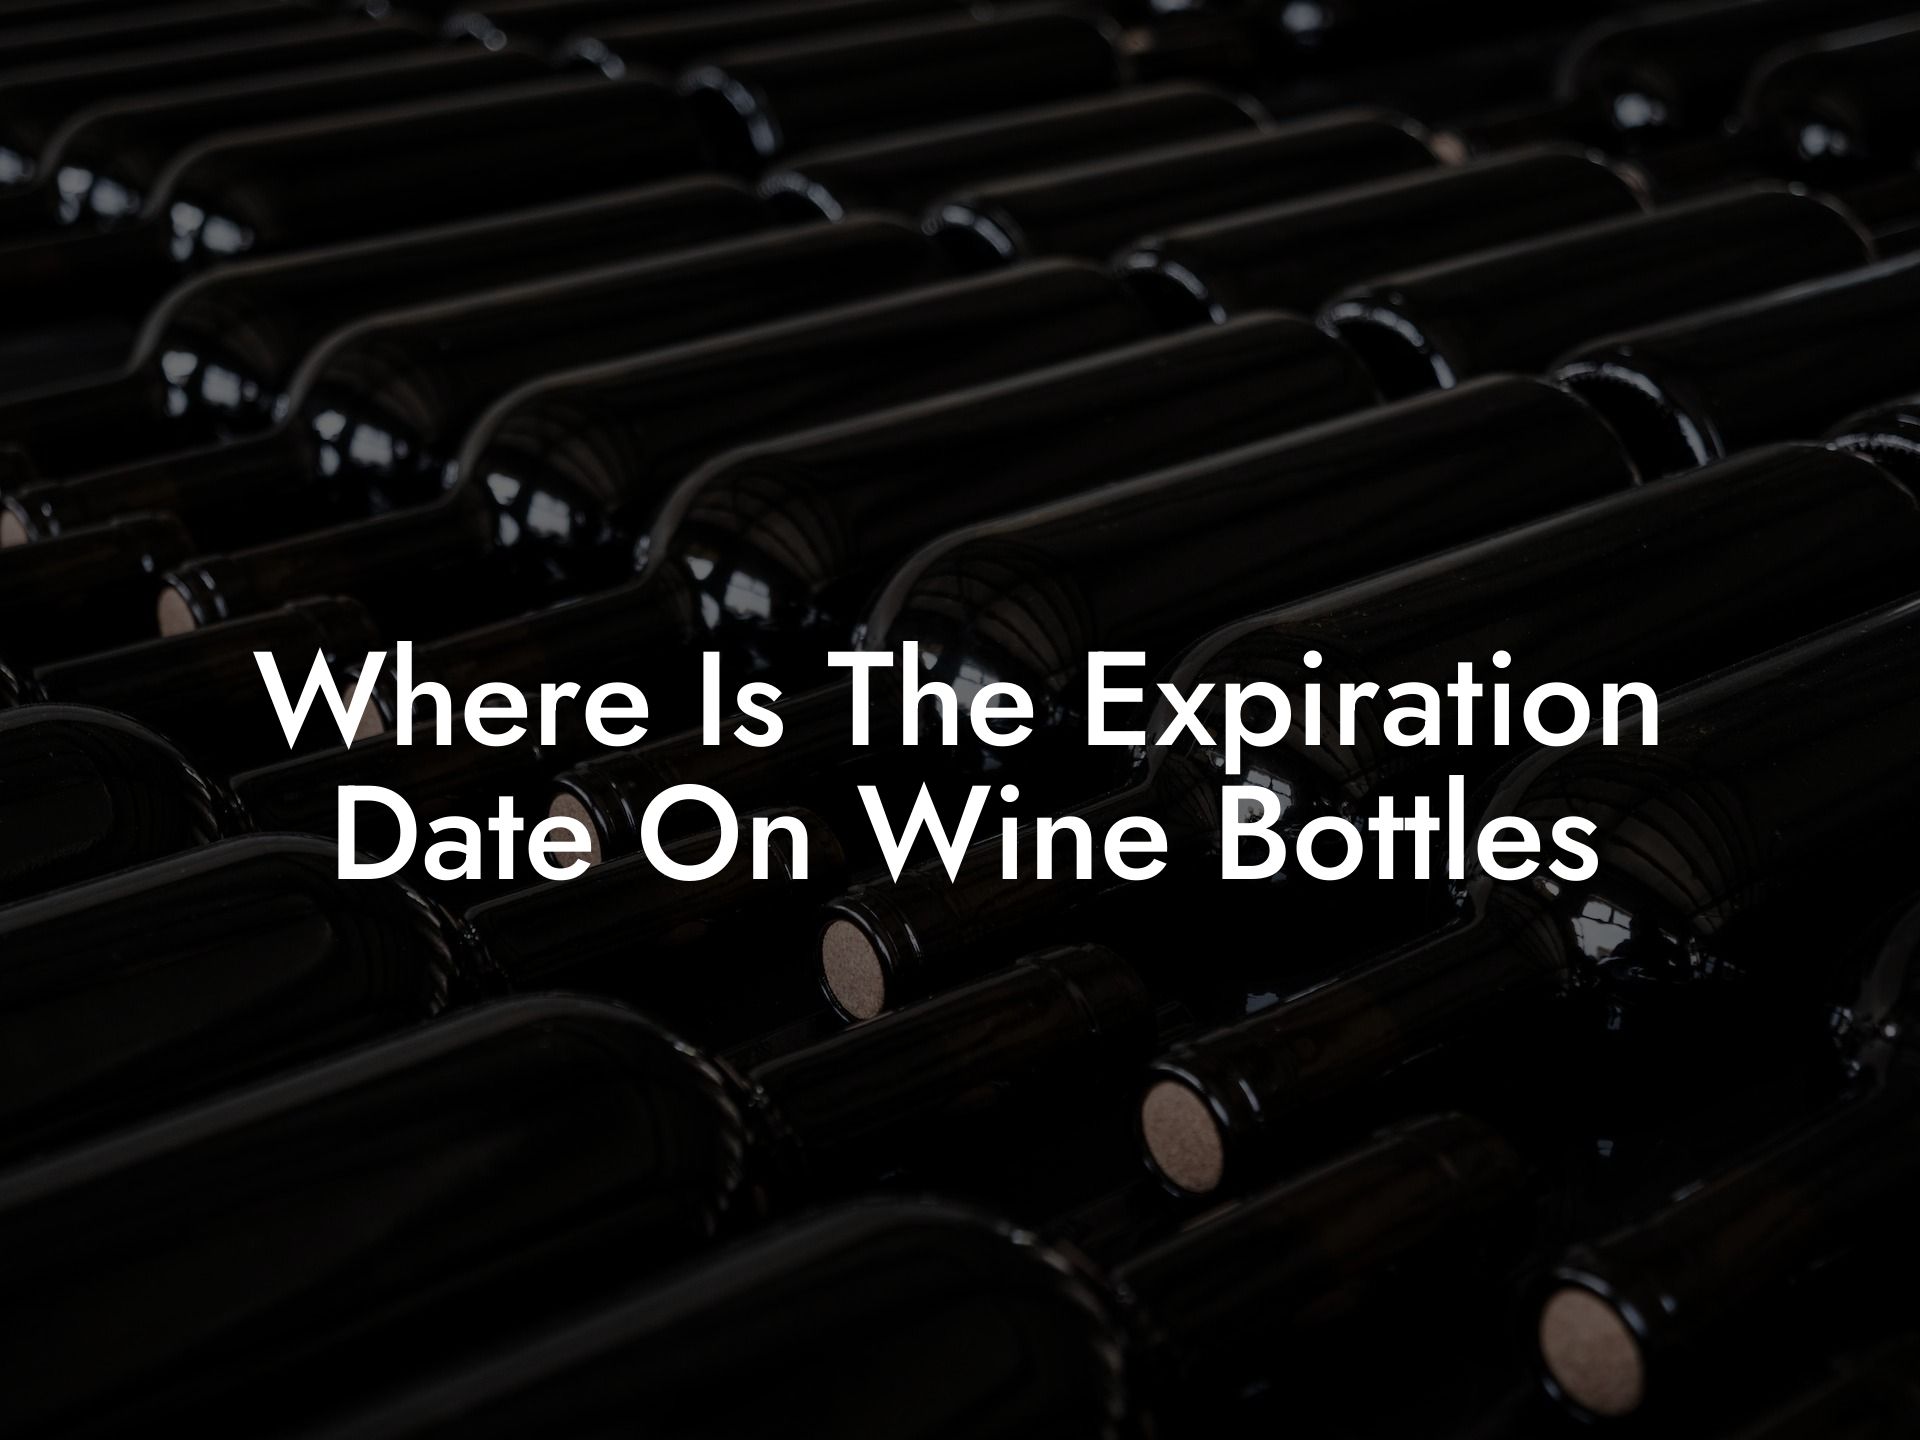 Where Is The Expiration Date On Wine Bottles